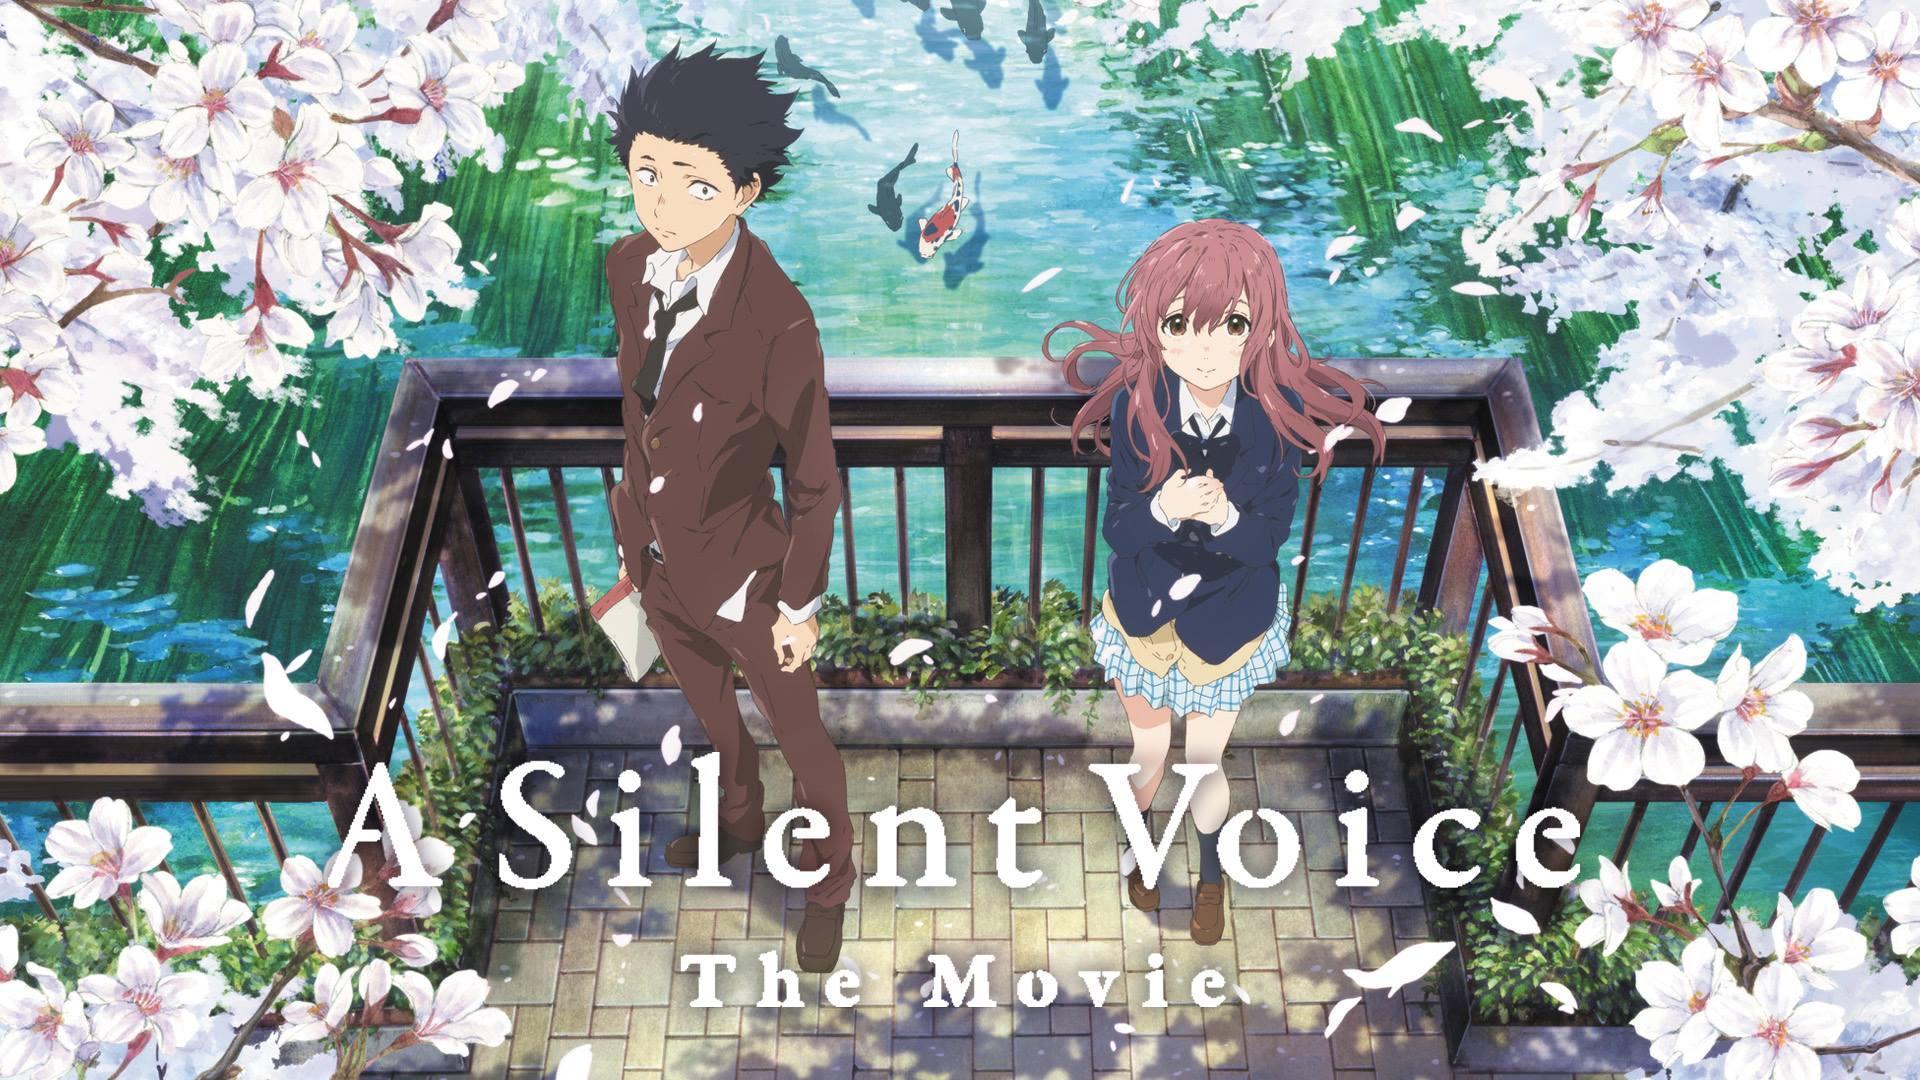 Download A Silent Voice Wallpaper, HD Background Download